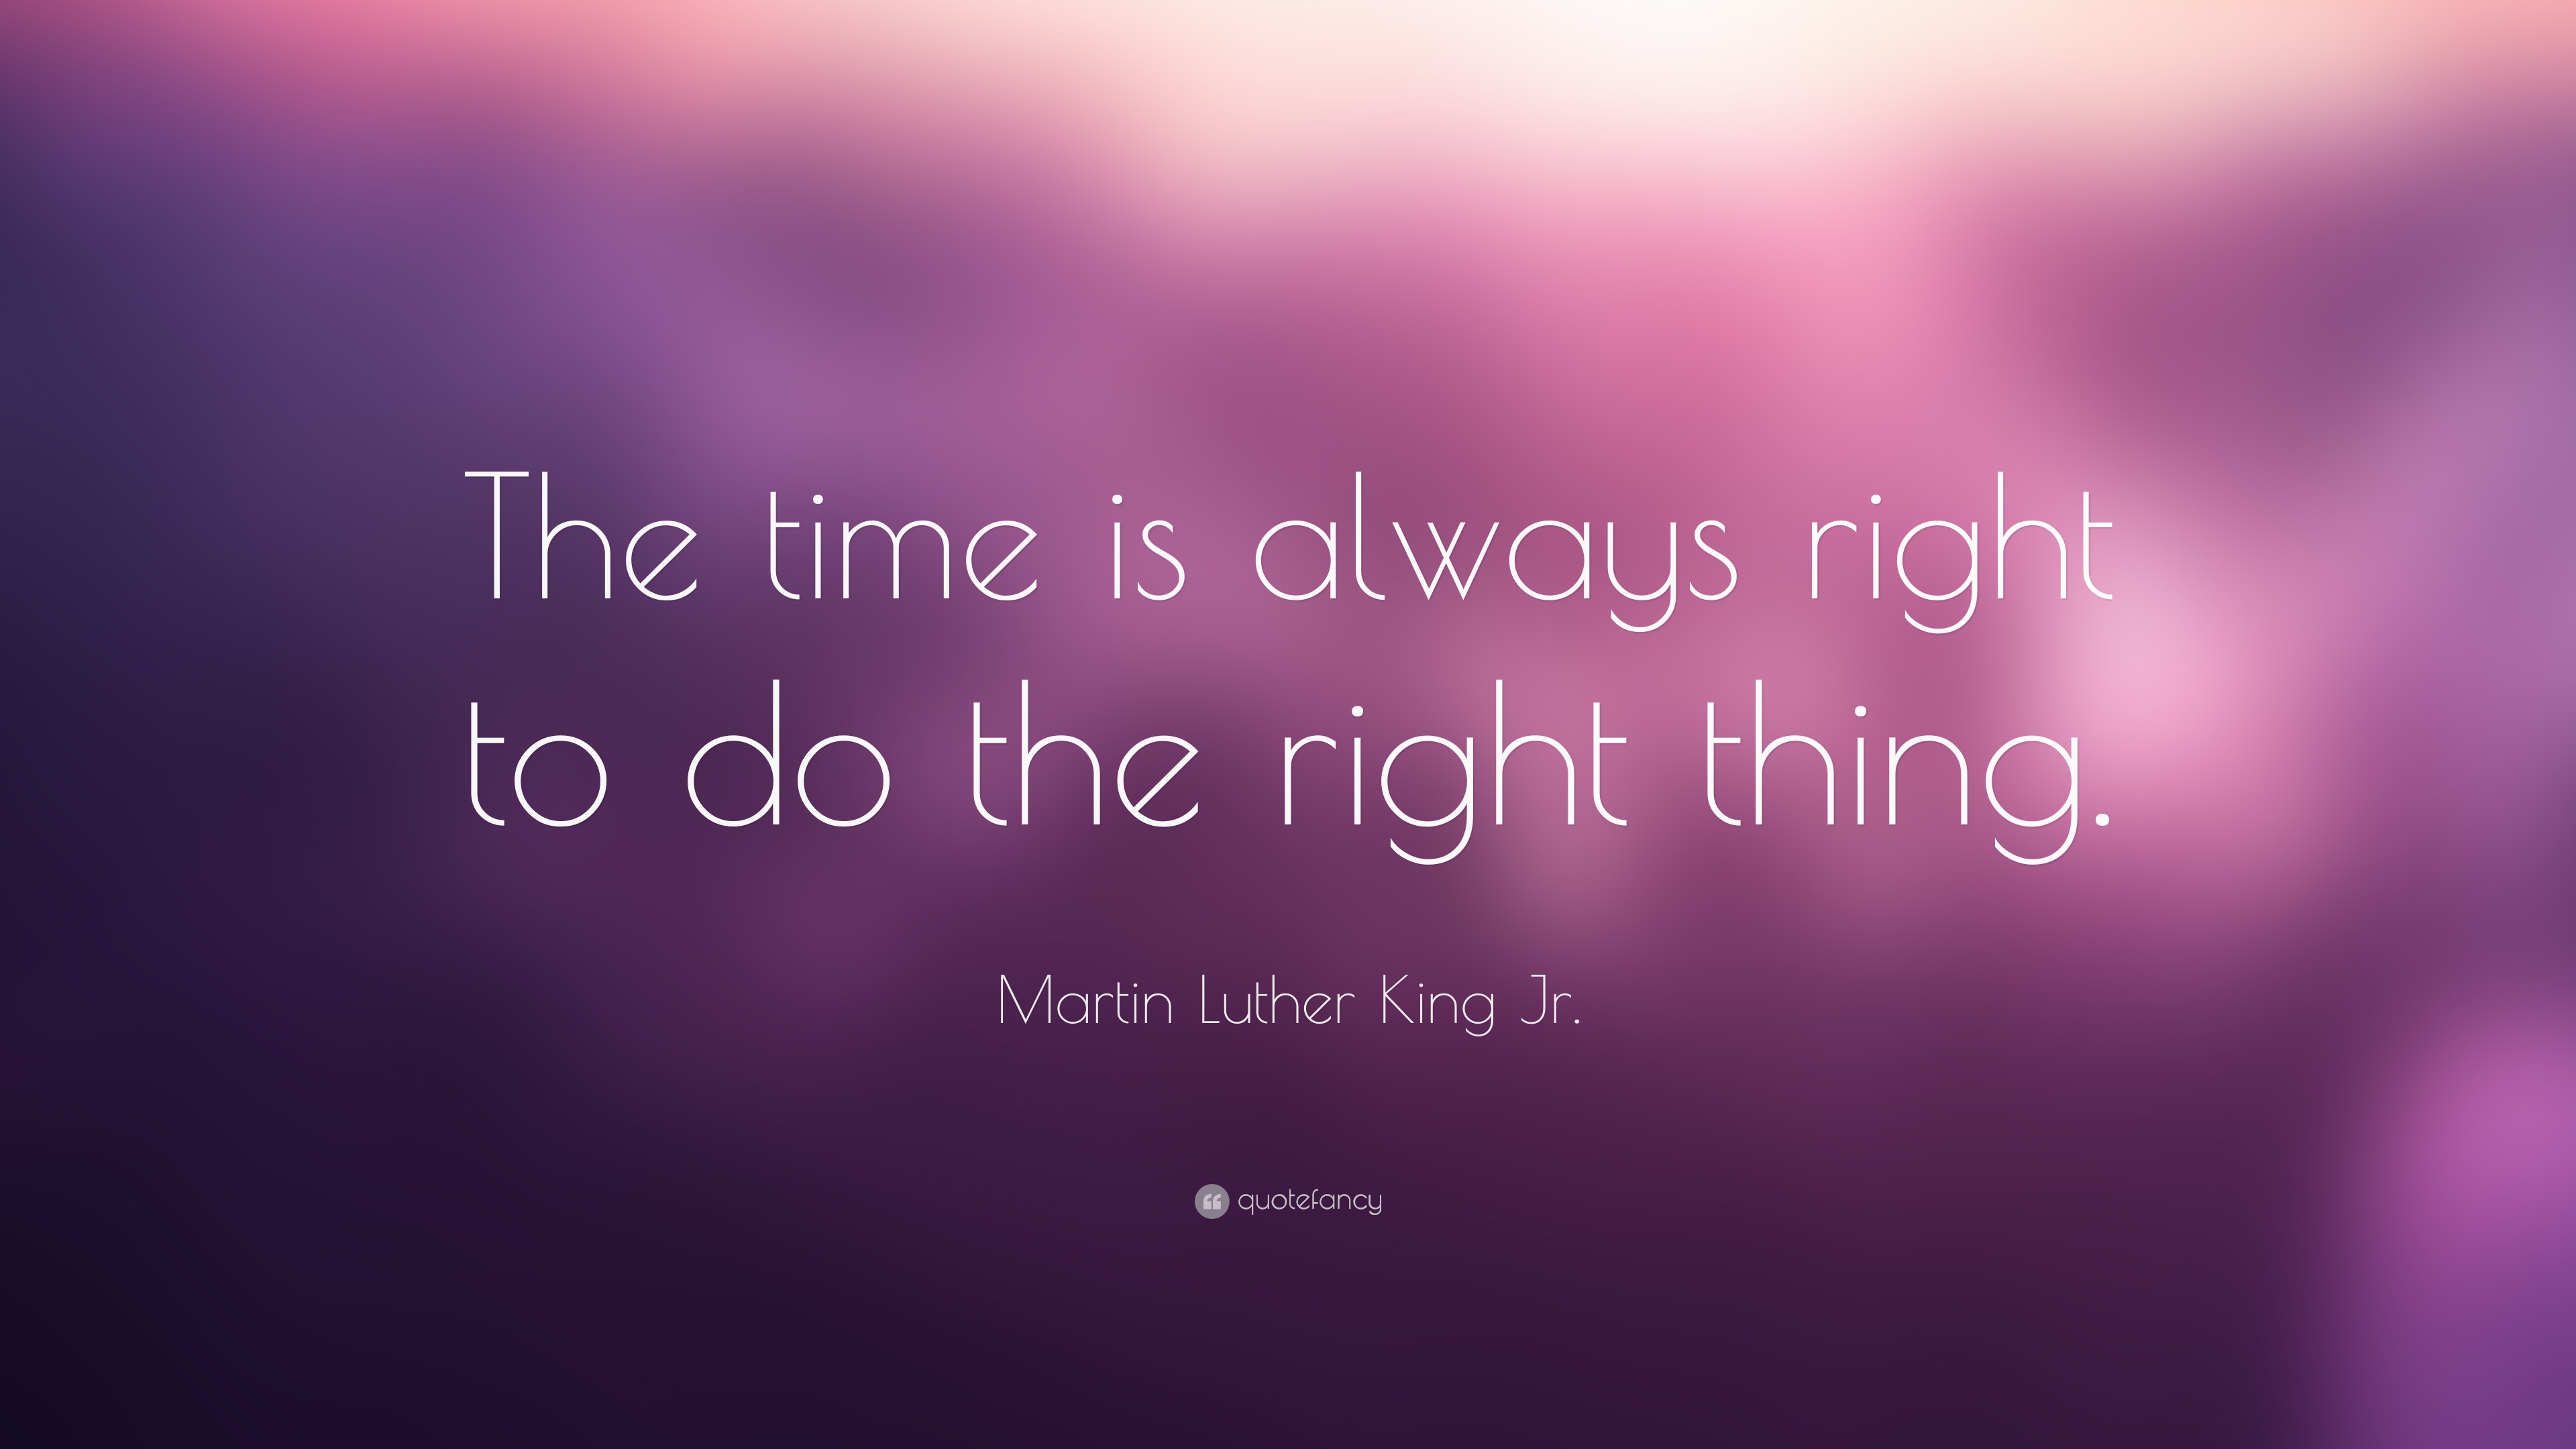 988-Martin-Luther-King-Jr-Quote-The-time-is-always-right-to-do-the